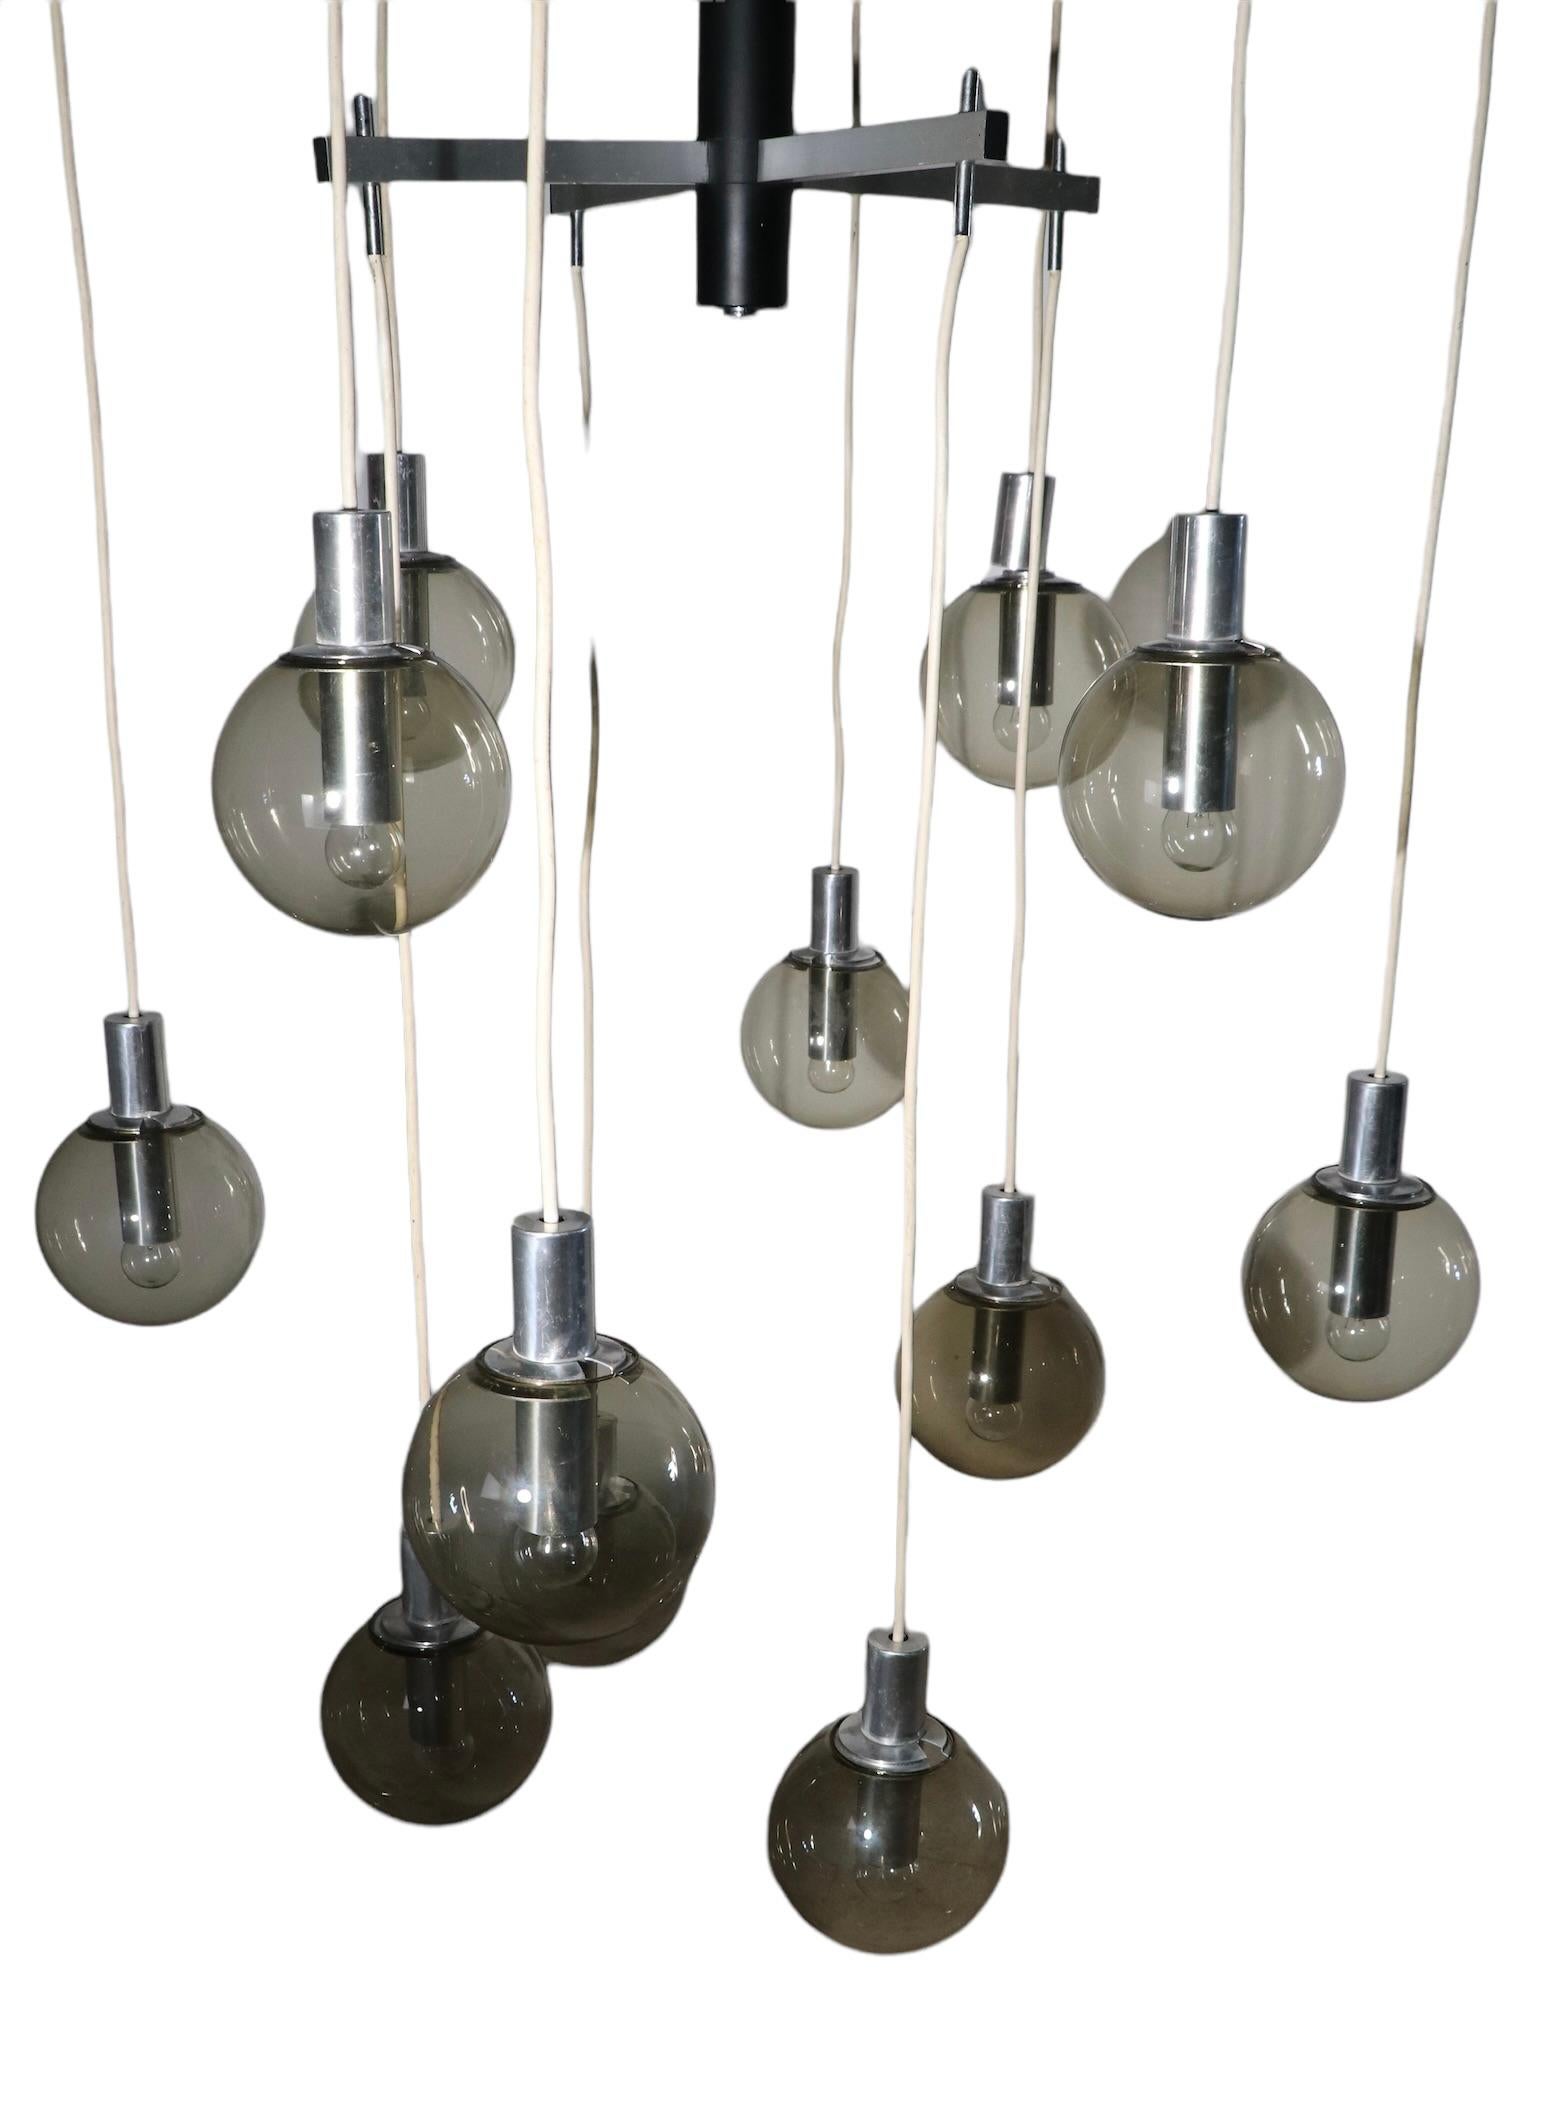 Large Modernist 12 Light Chandelier with Tinted Glass Ball Shades Ca. 1970's For Sale 12